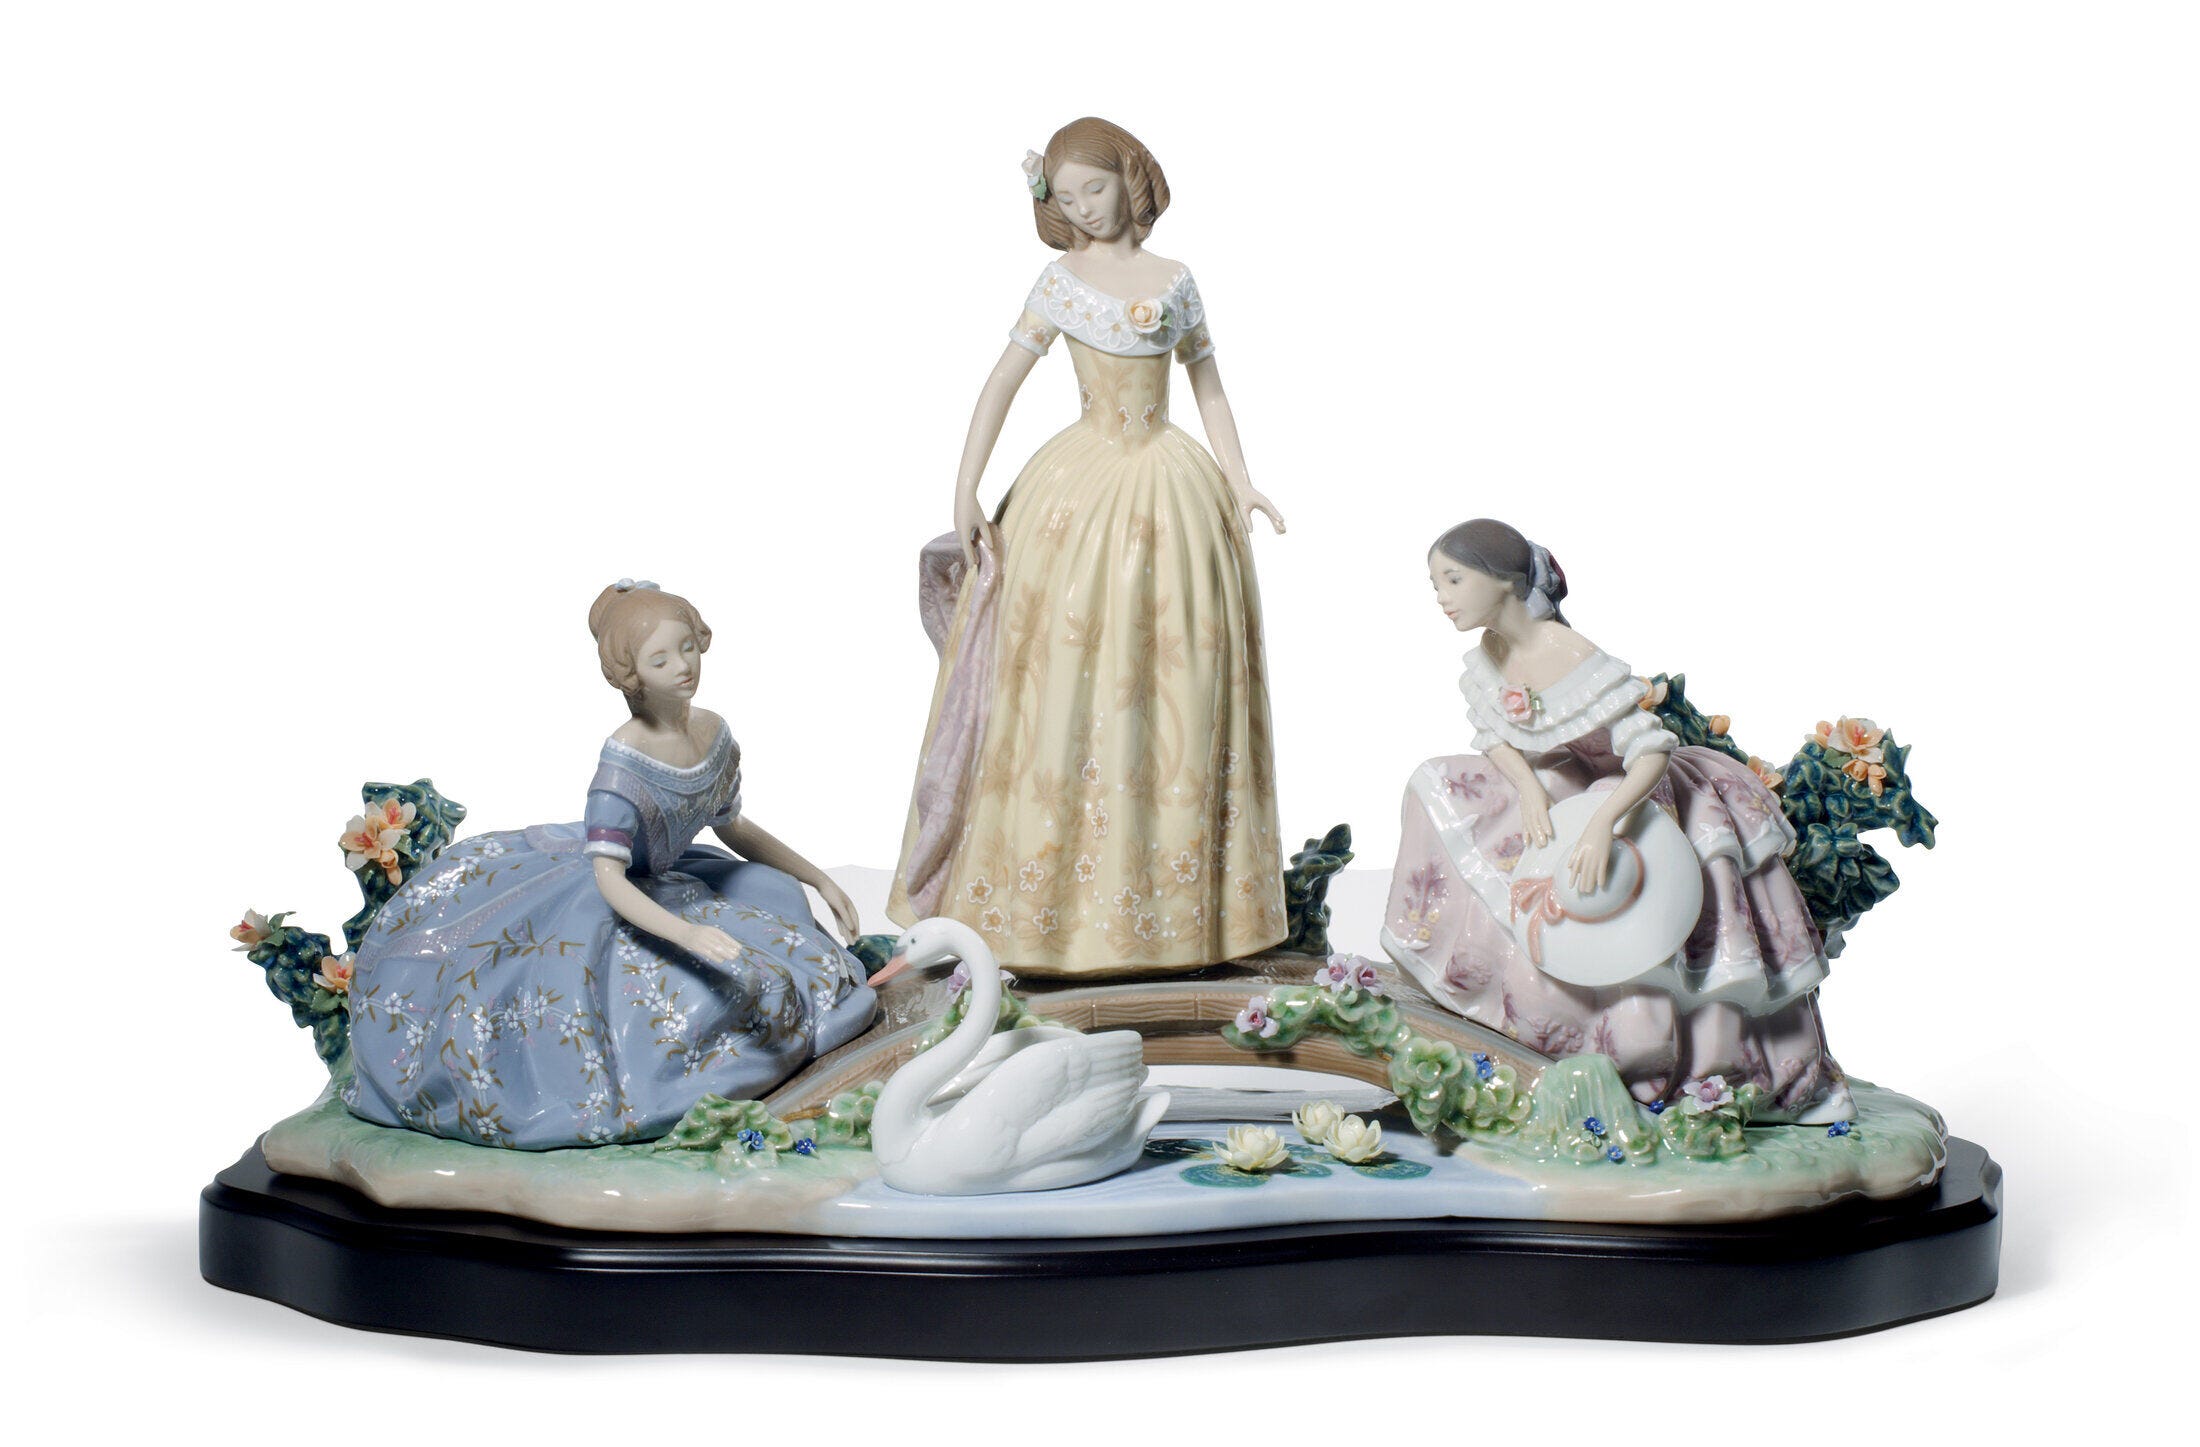 Daydreaming By The Pond Women Sculpture. Limited Edition - Lladro